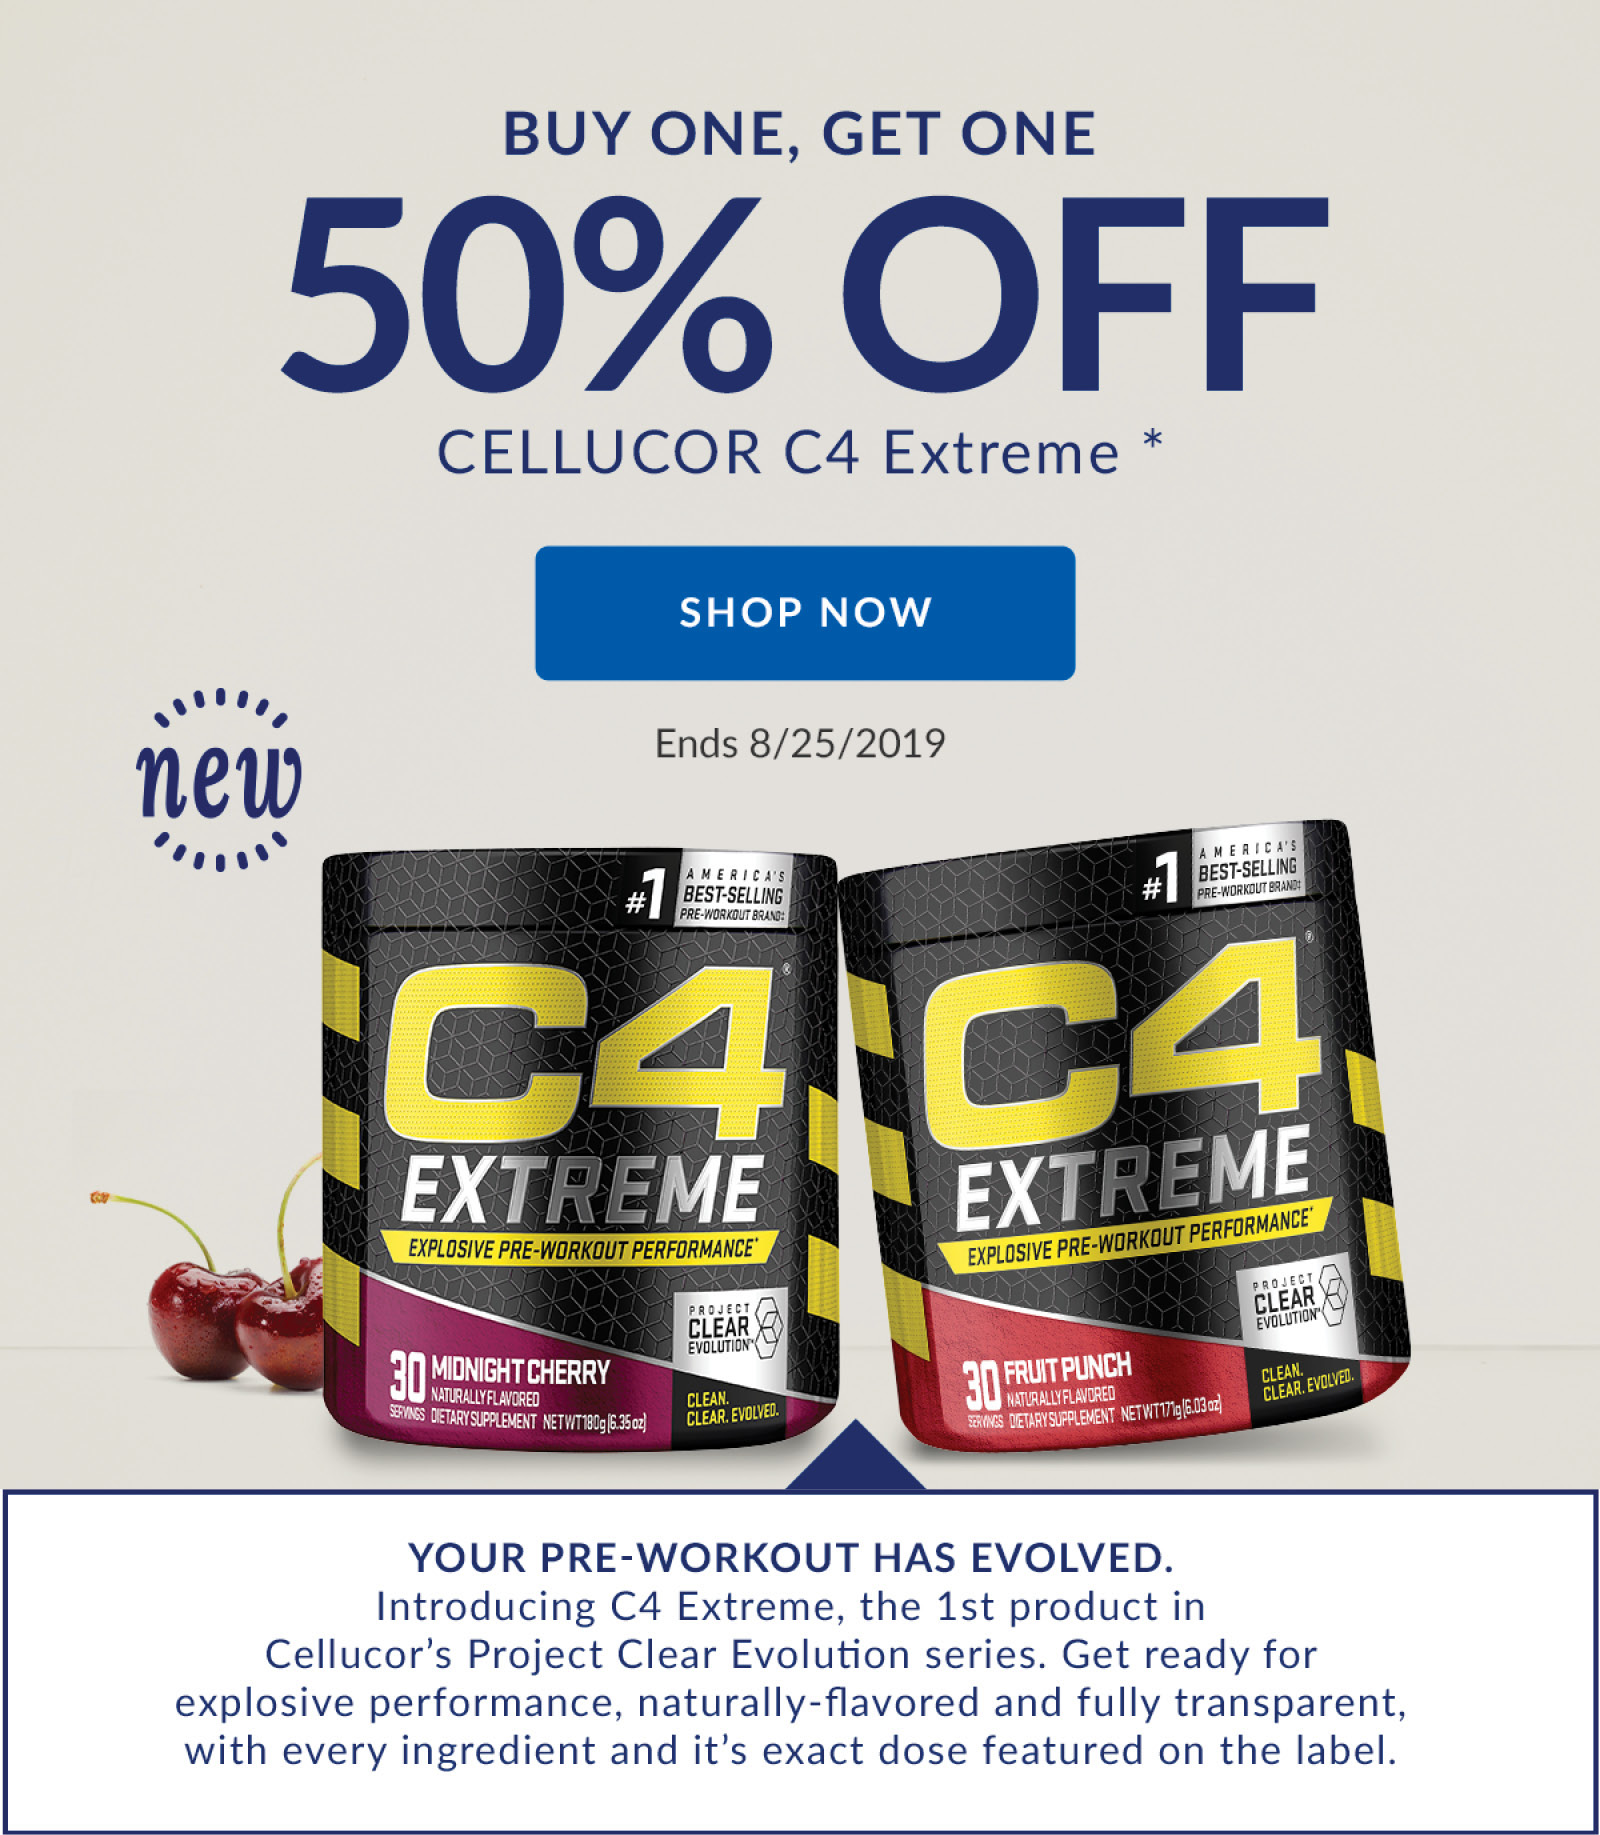 BUY ONE, GET ONE 50% OFF CELLUCOR C4 Extreme * | SHOP NOW | Ends 8/25/2019 | YOUR PRE-WORKOUT HAS EVOLVED. Introducing C4 Extreme, the 1st product in Cellucor's Project Clear Evolution series. Get ready for explosive performance, naturally-flavored and fully transparent, with every ingredient and it's exact dose featured on the label.